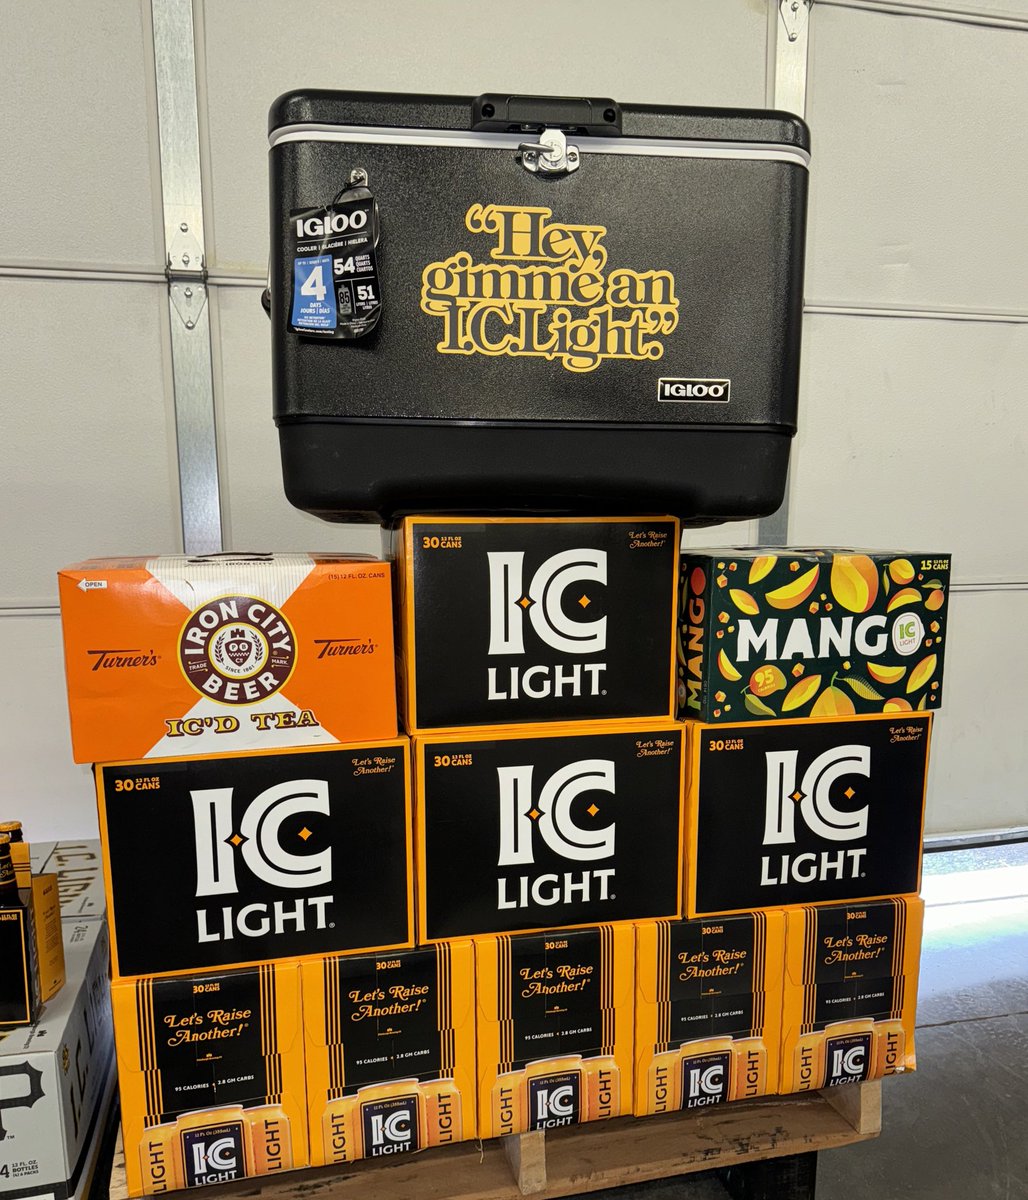 🚨Giveaway Time🚨 We teased it yesterday - we’ve got an AWESOME @iclightbeer @iglooproducts cooler up for grabs this week! To enter, just make sure you’re following us and tag one friend below - that’s it! Unlimited entries welcome! One lucky winner will be selected this Friday